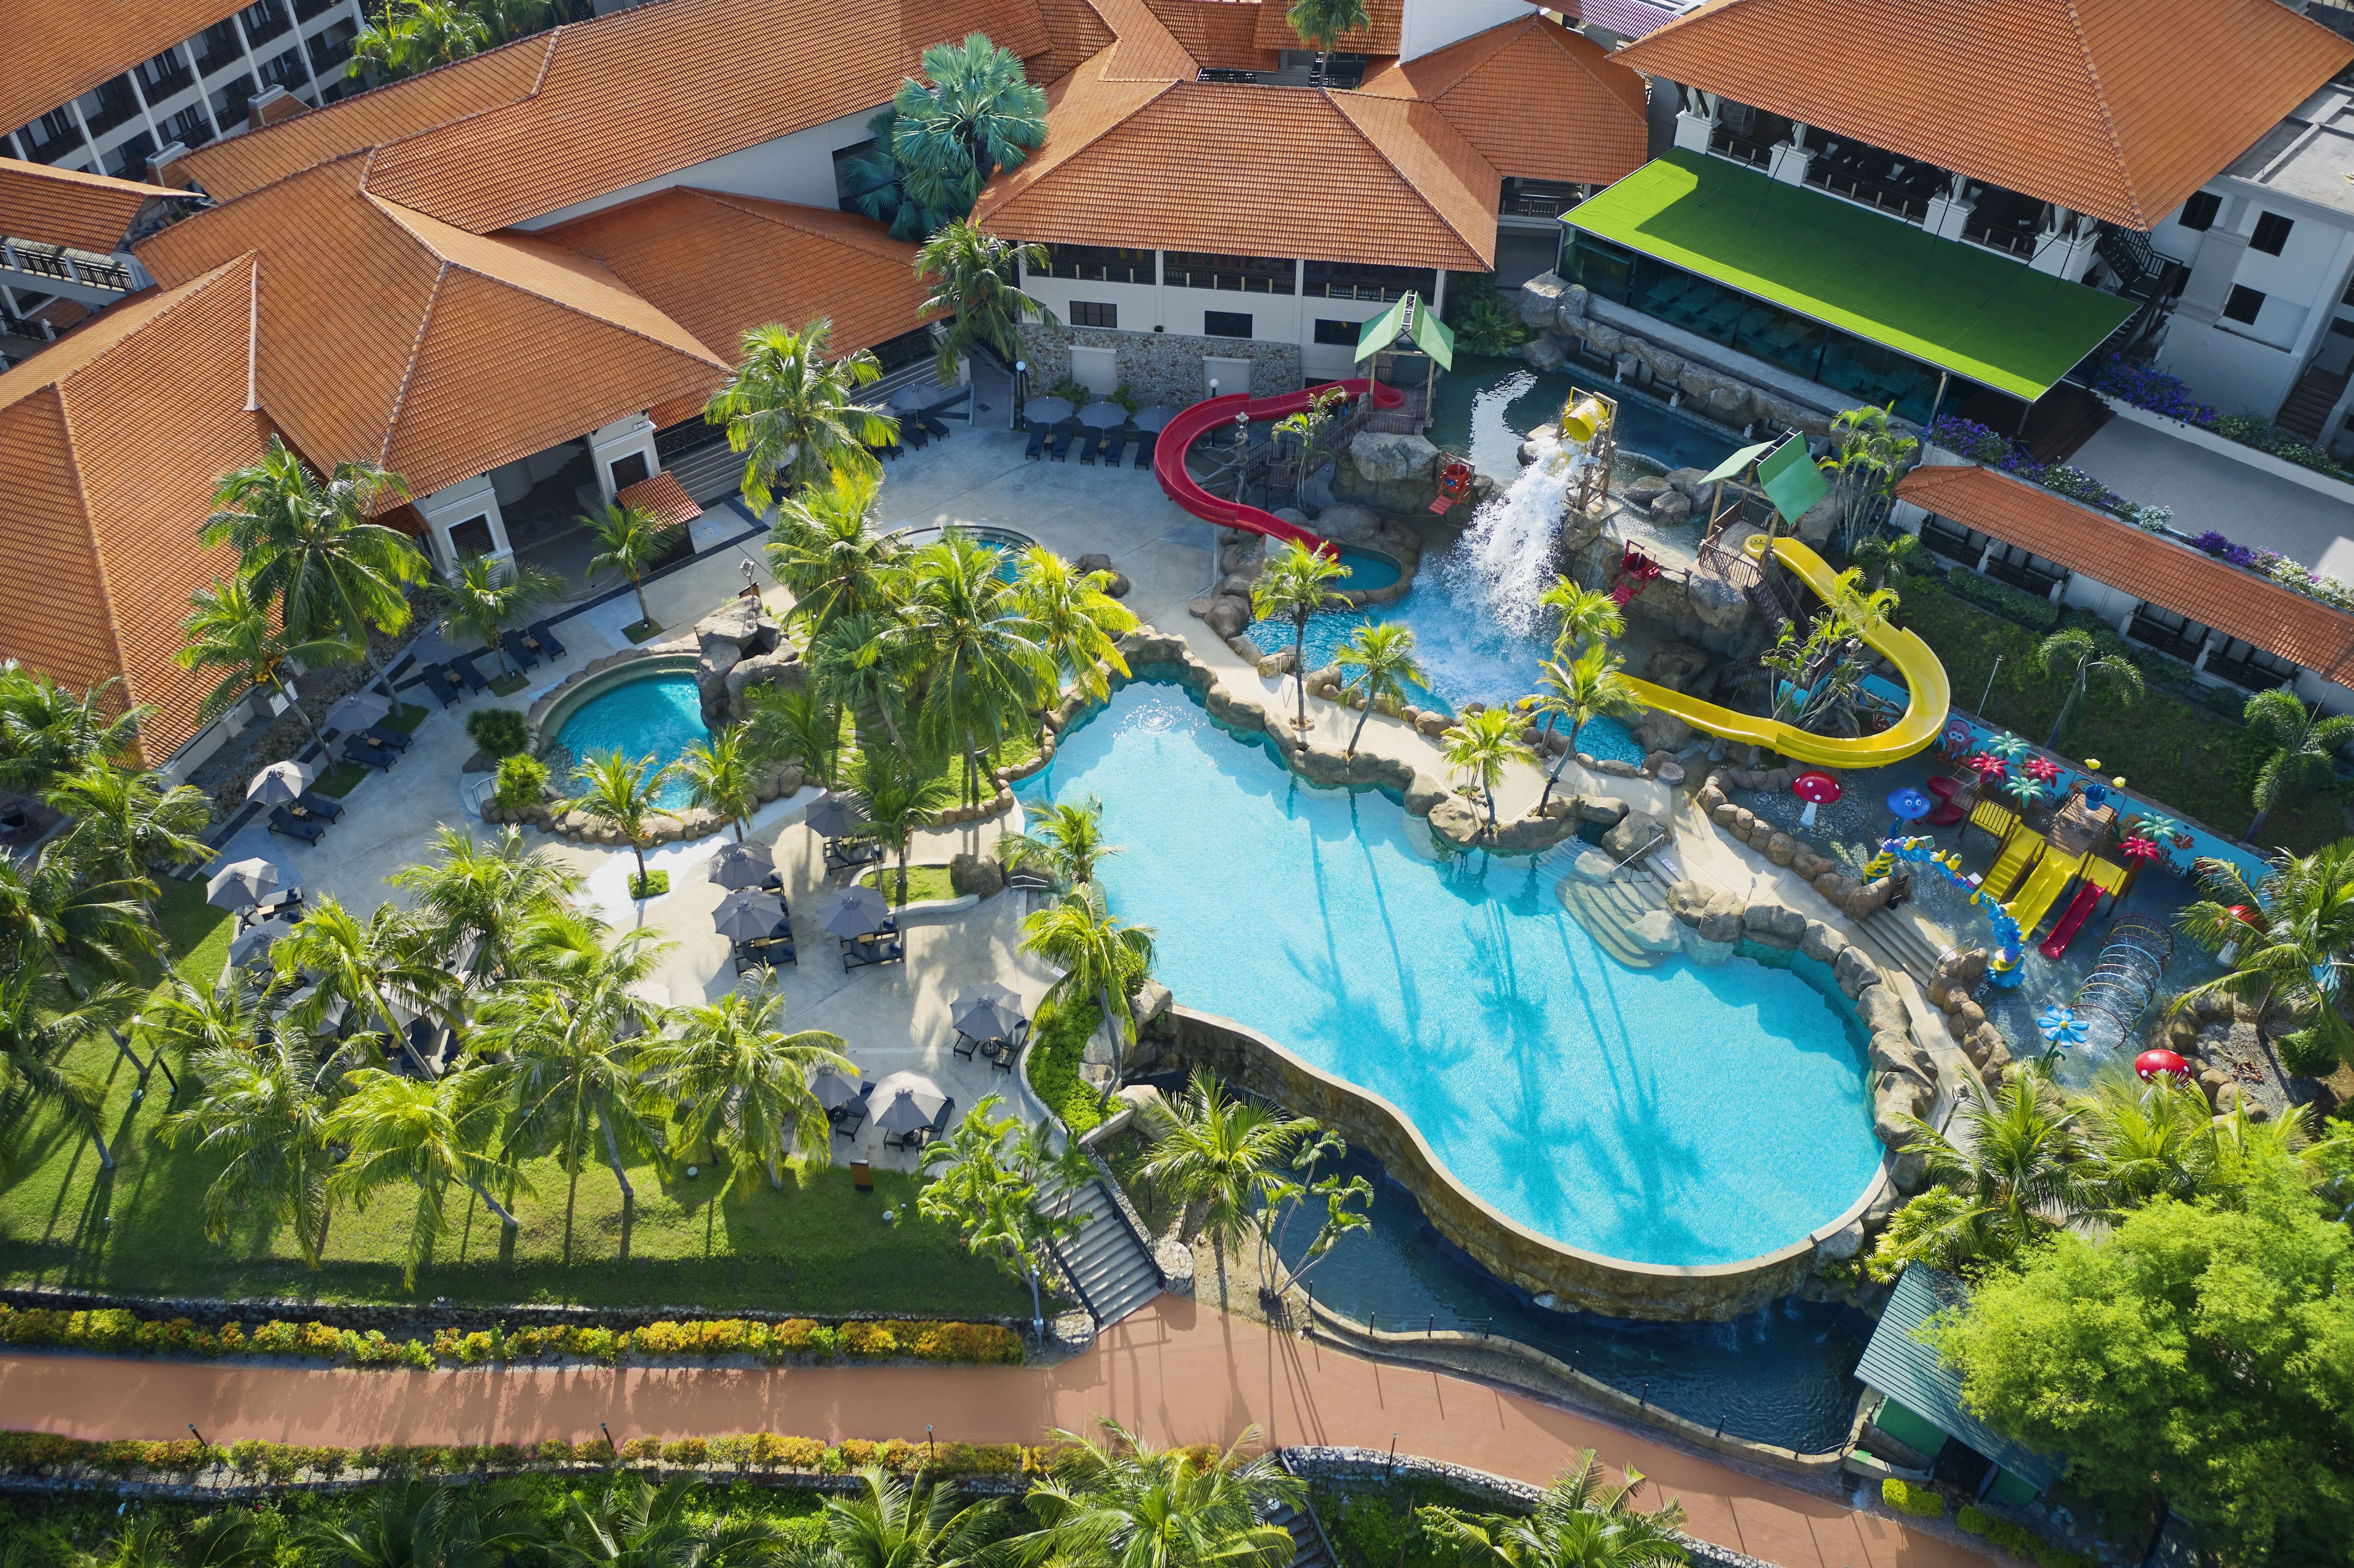 Aerial shot of outdoor pool area